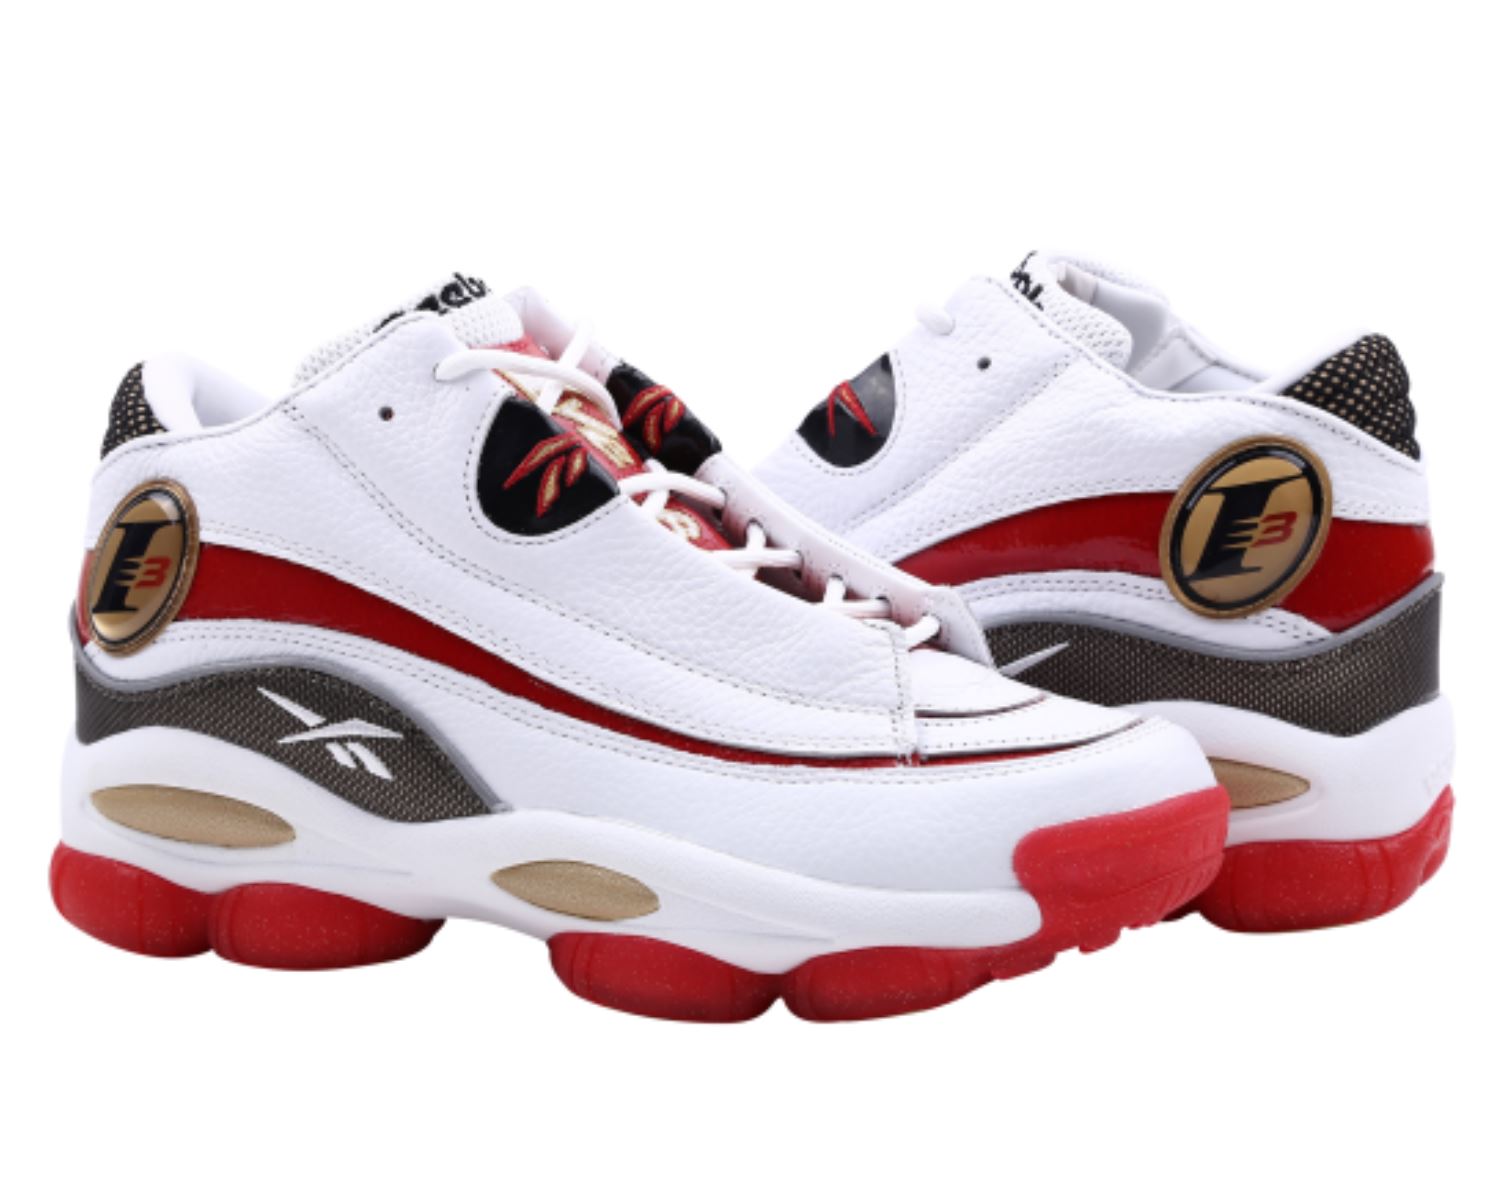 The China-Exclusive Reebok Answer 1 DMX 